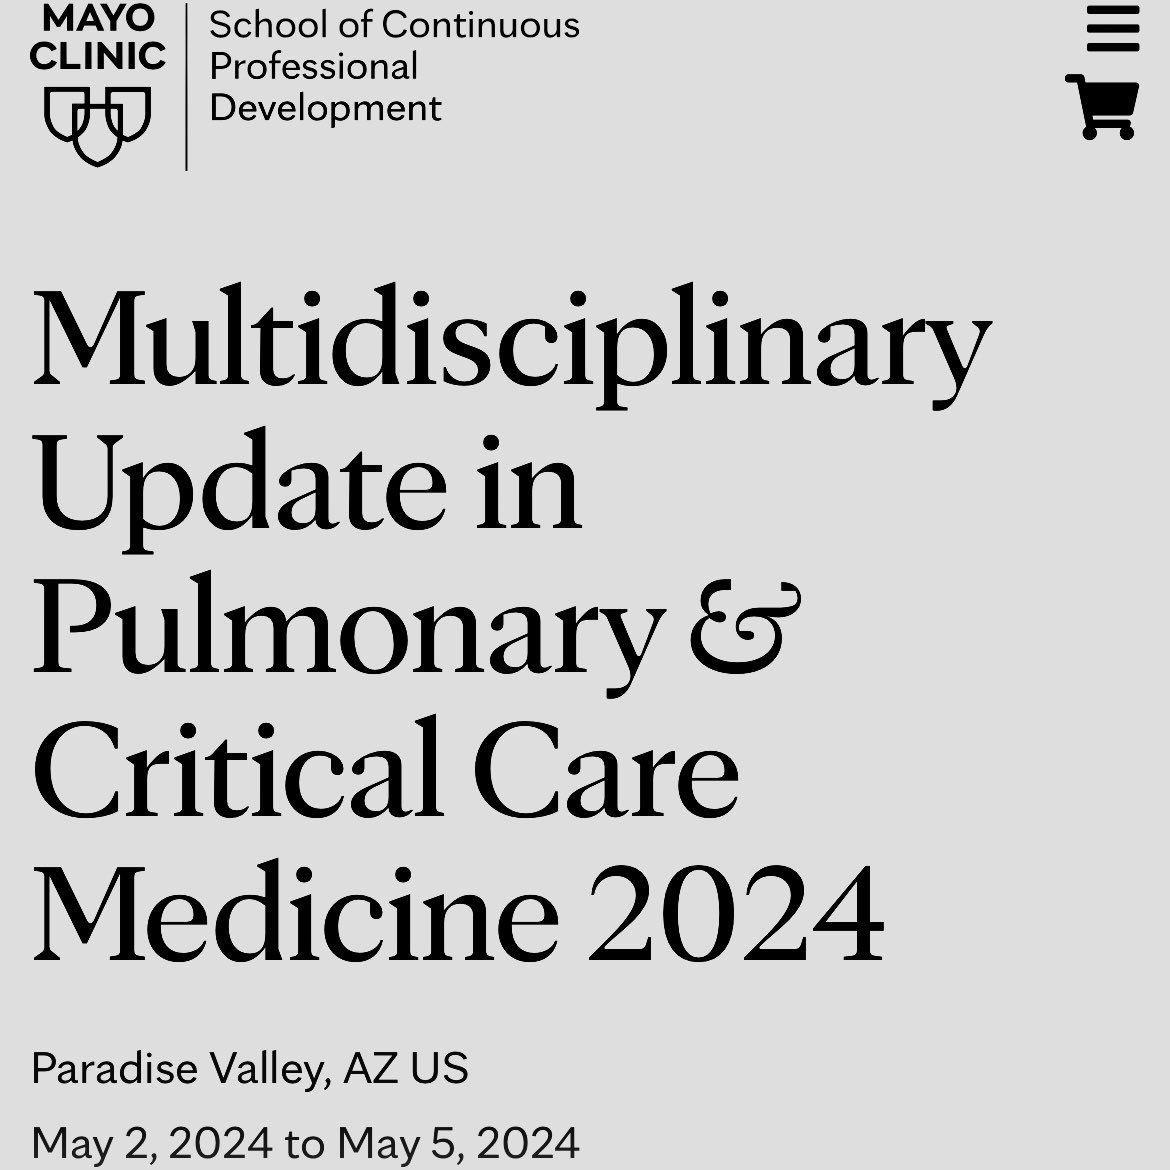 Join @MayoPCCM faculty in Paradise Valley, AZ, on May 2-5, 2024 for a state-of-the-art update on clinical advances, current evaluation and management in pulmonary medicine, critical care and sleep medicine. Register here: app.e.response.mayoclinic.org/e/es?s=7488180…